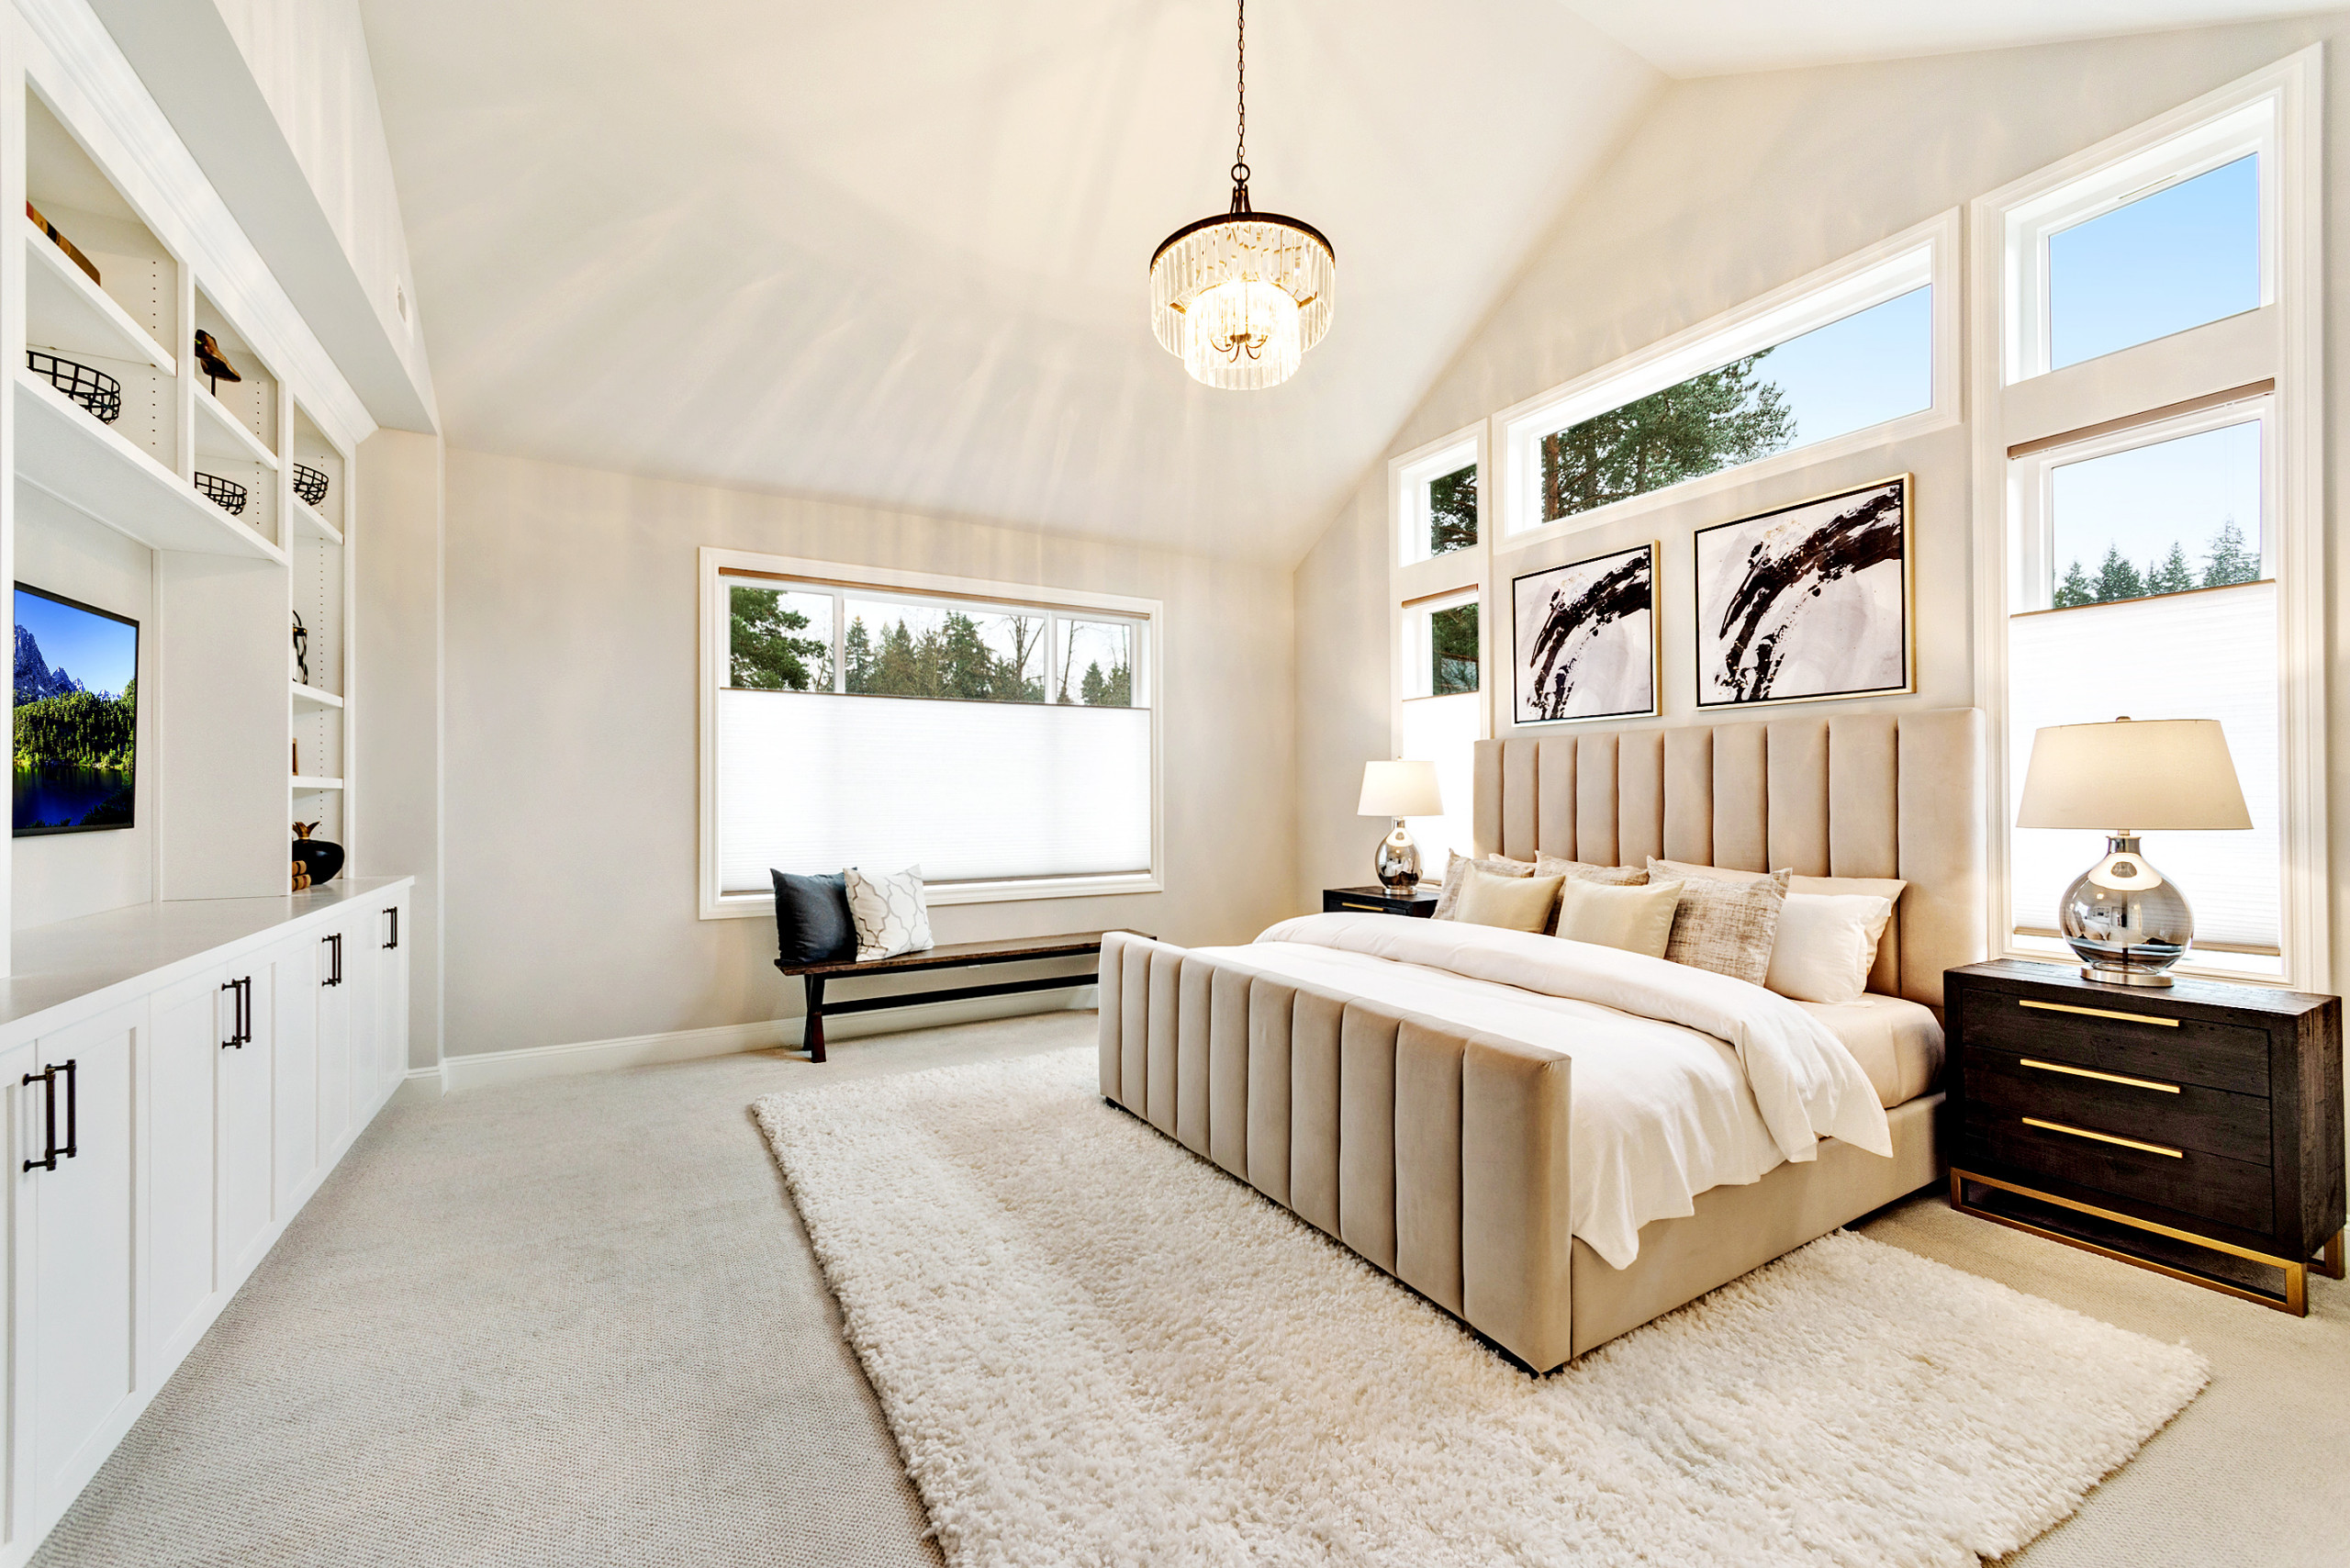 75 Vaulted Ceiling Bedroom Ideas You Ll